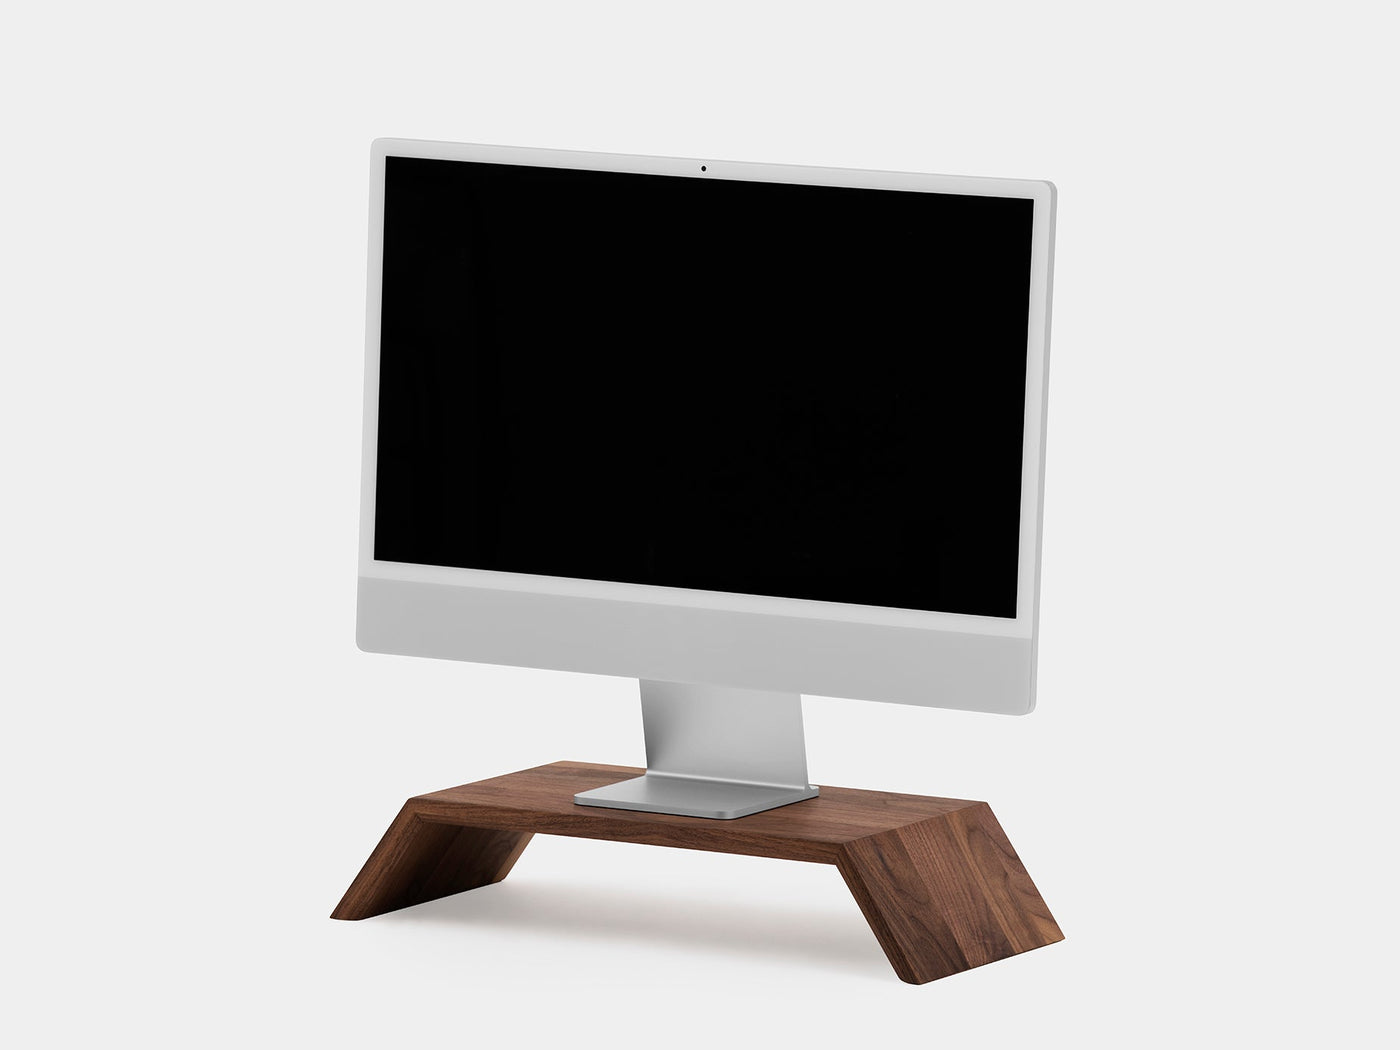 Monitor Stand